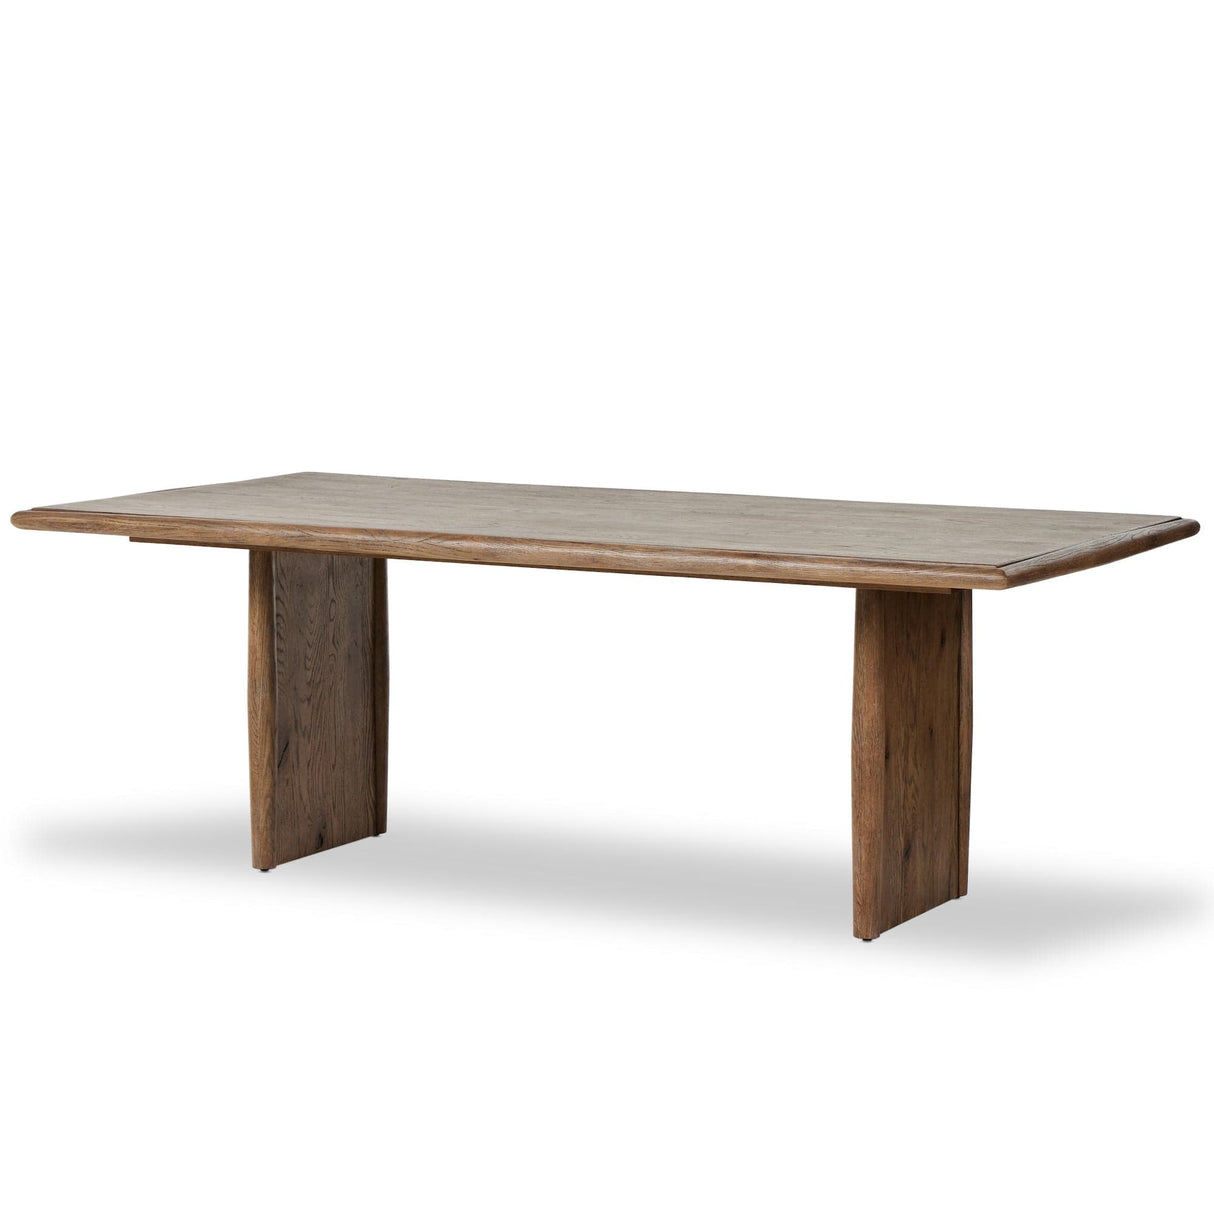 Four Hands Glenview Dining Table Dining Tables four-hands-236454-001 801542132392